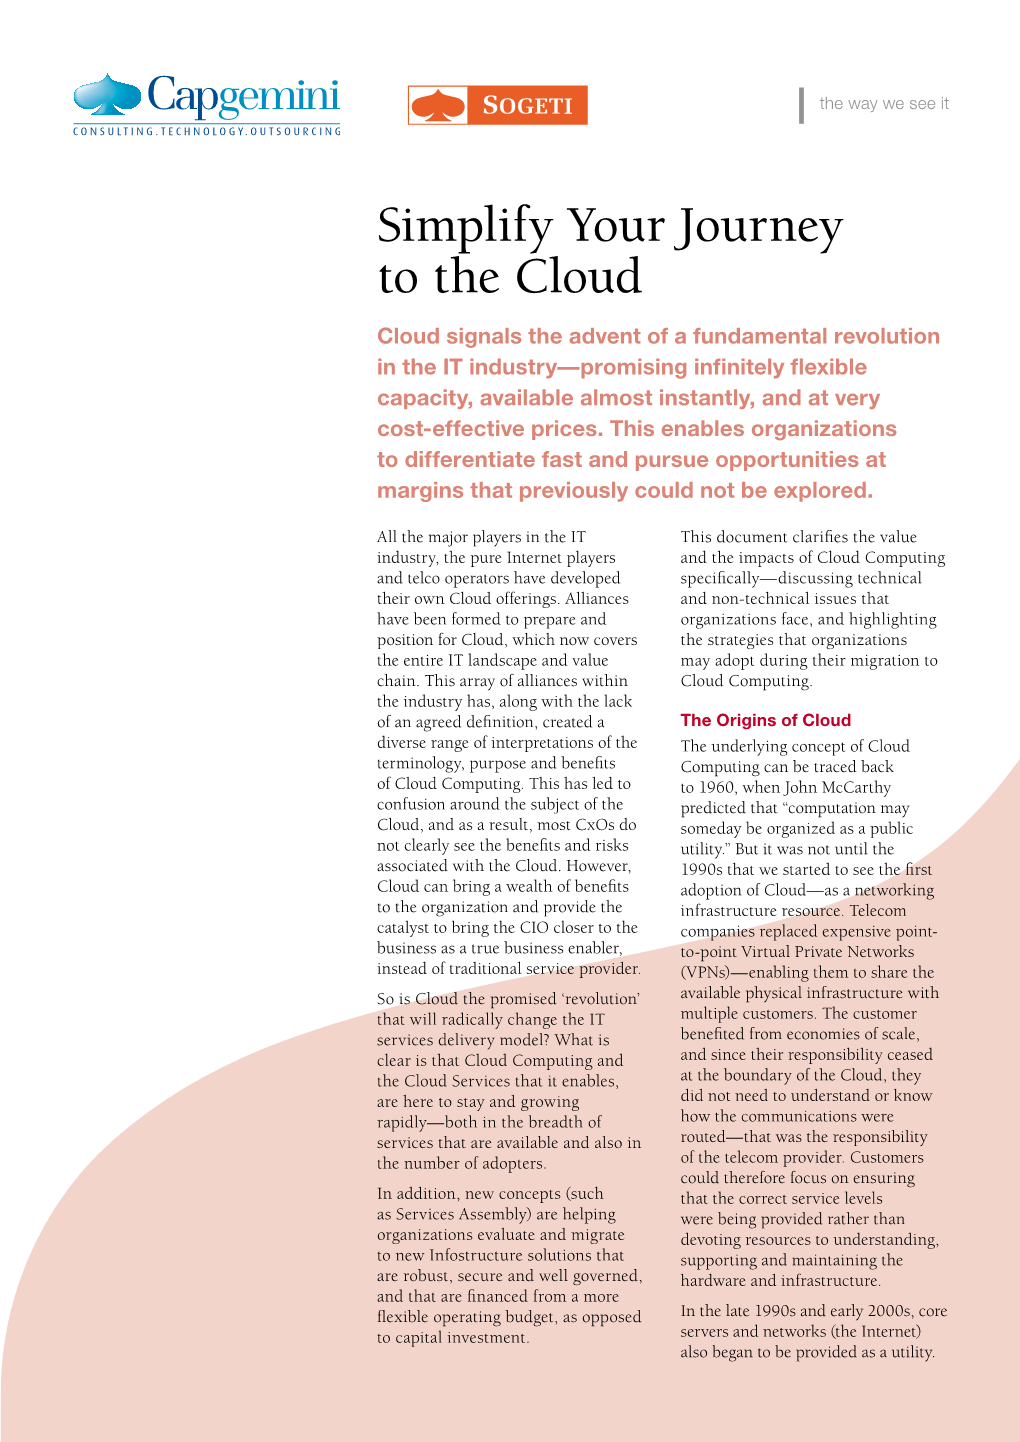 Simplify Your Journey to the Cloud